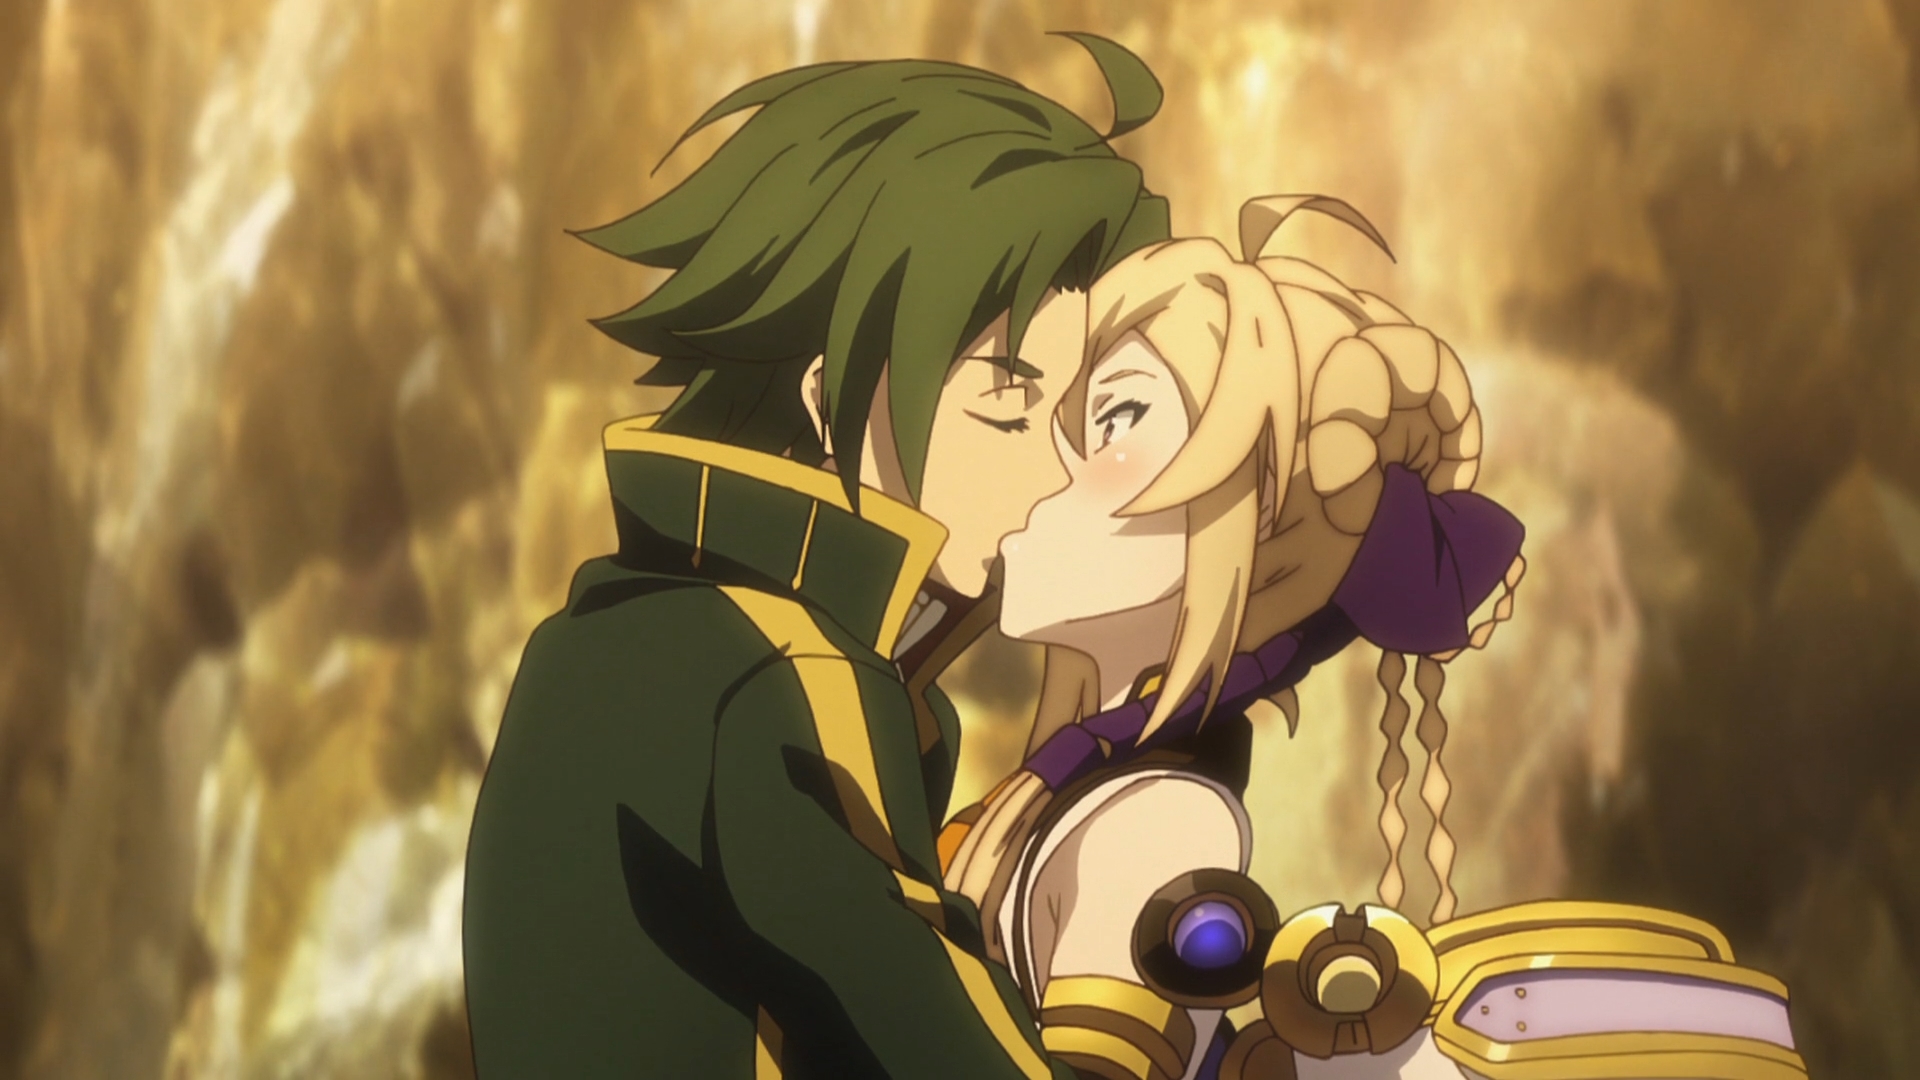 Record Of Grancrest War wallpapers.